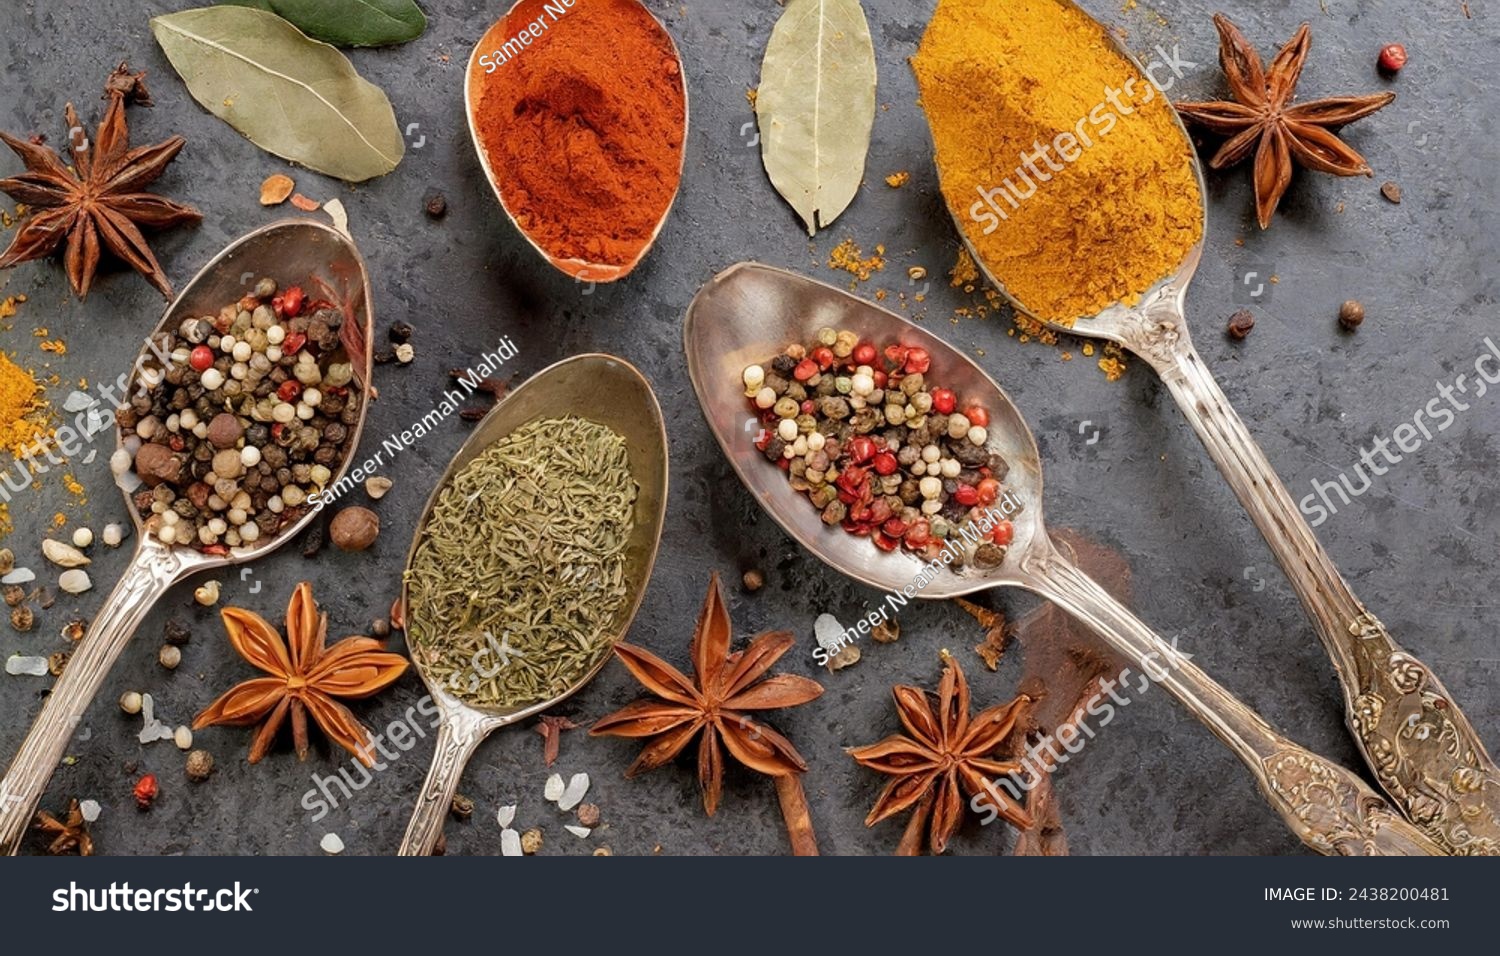 A circle of wooden spoons holding an array of assorted spices rests on a rustic stone tabletop. This vibrant display resembles an exotic Oriental spice market, brimming with colorful herbs and season. #2438200481